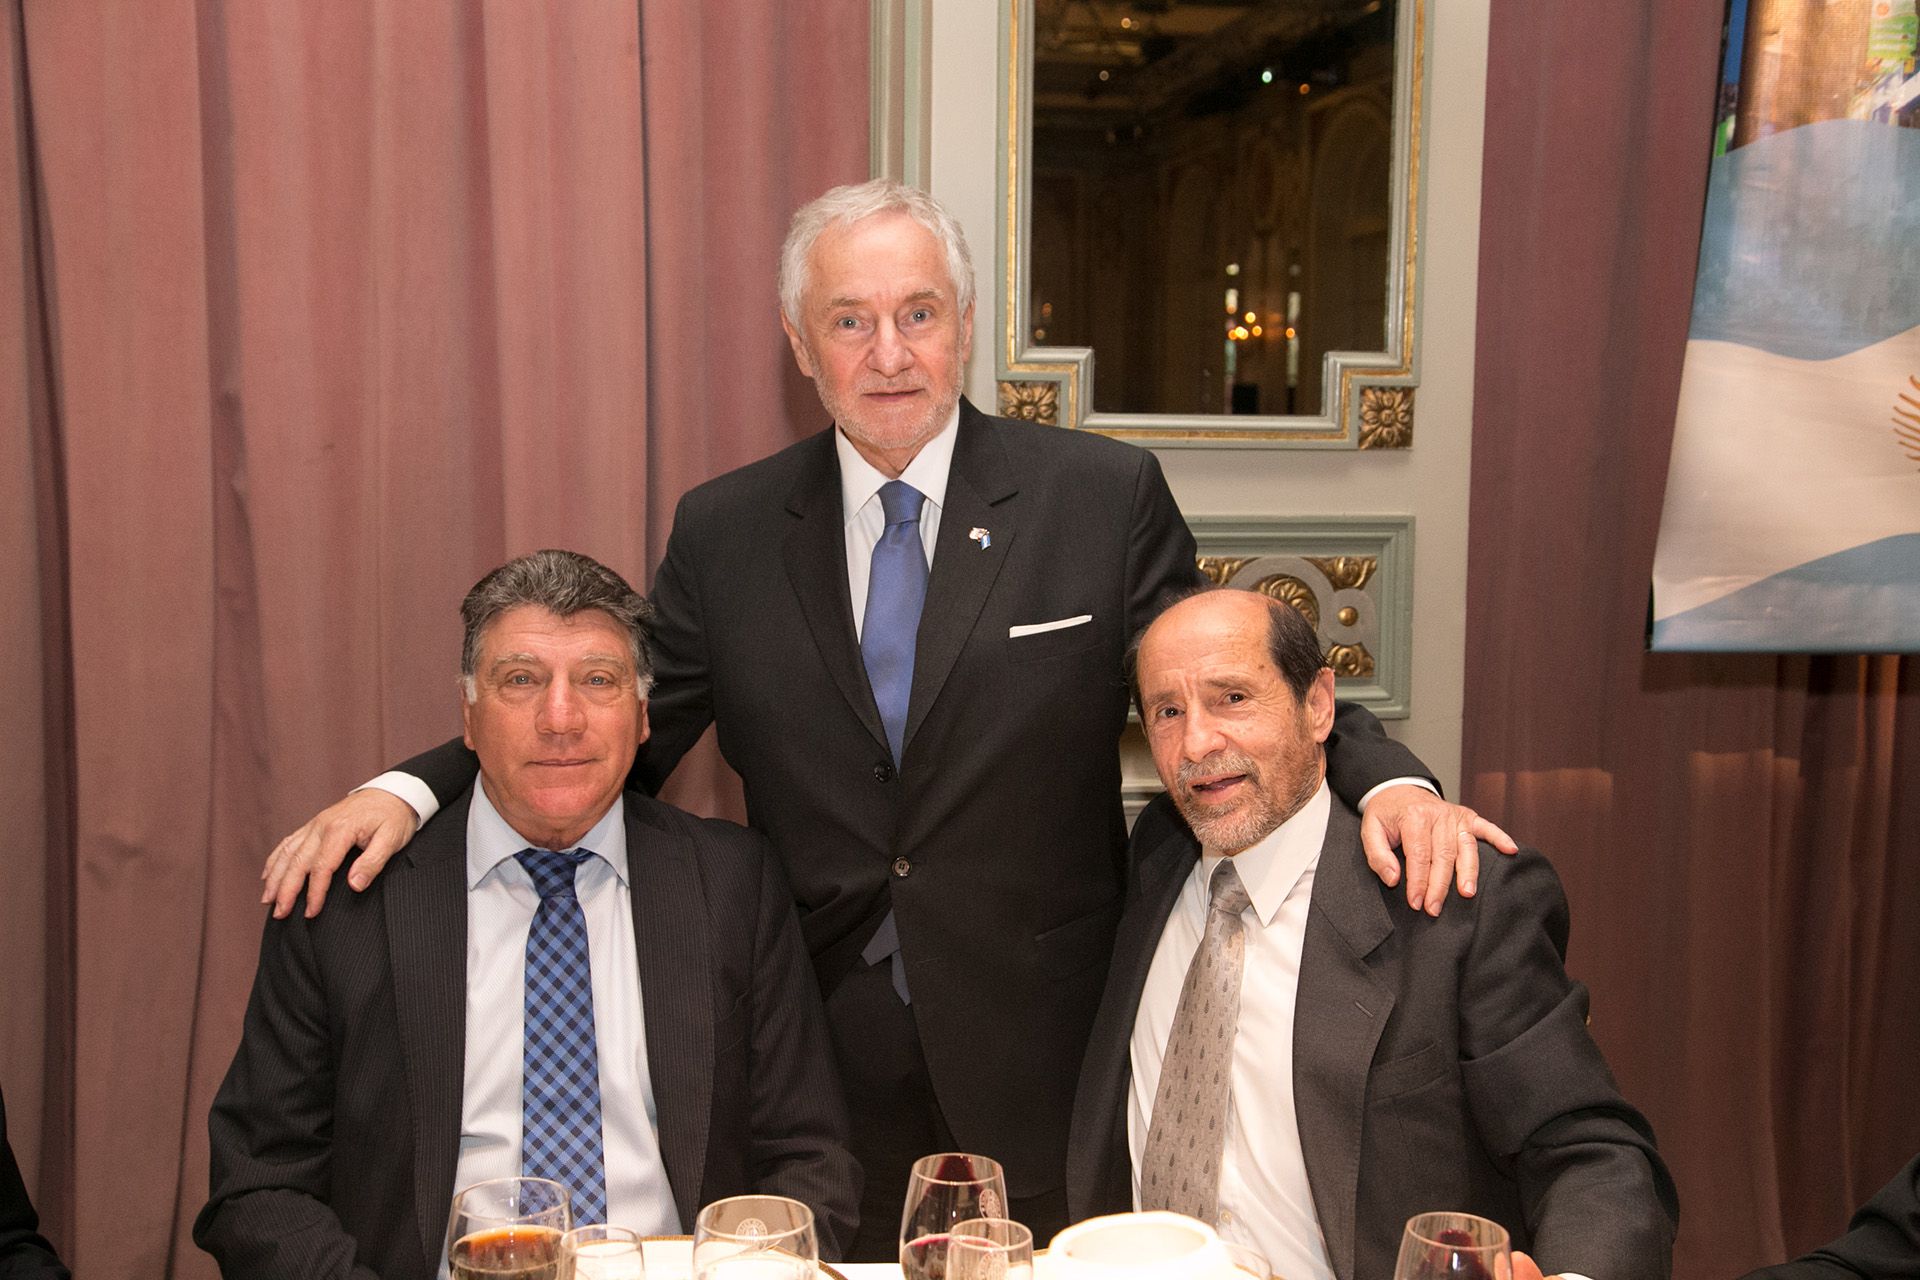 Miguel Angel Brindisi and Jorge Carrascosa, members of the 1973 champion Huracán, at a gala dinner